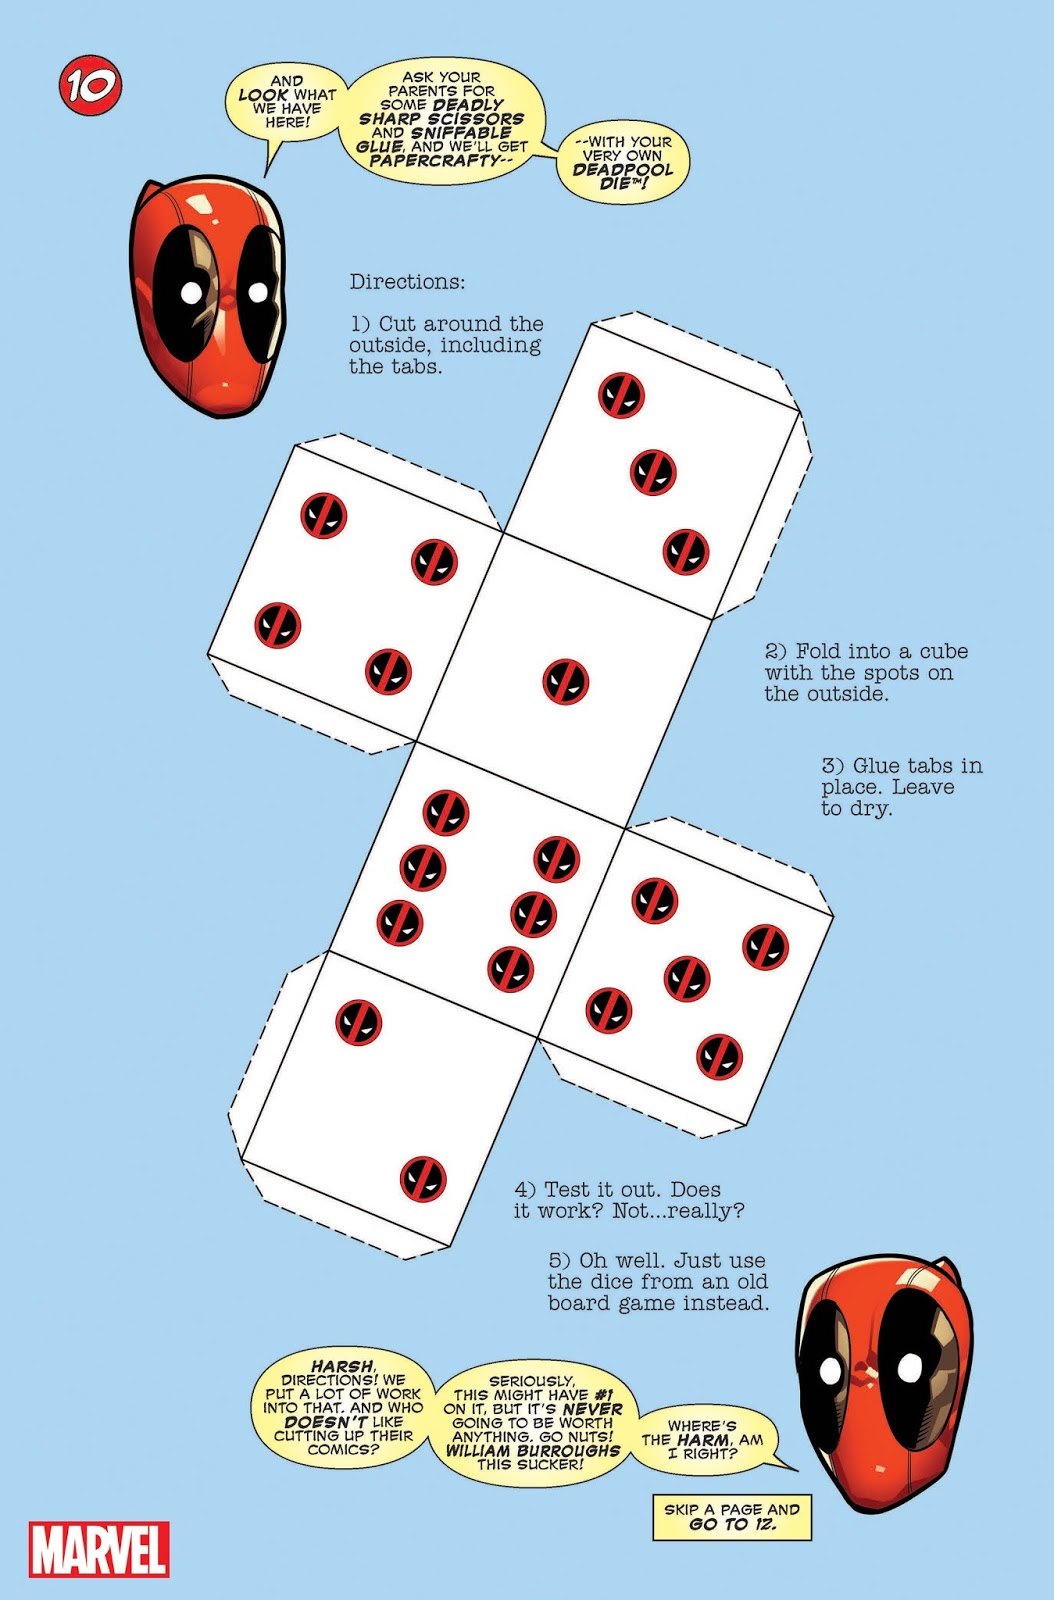 you are deadpool